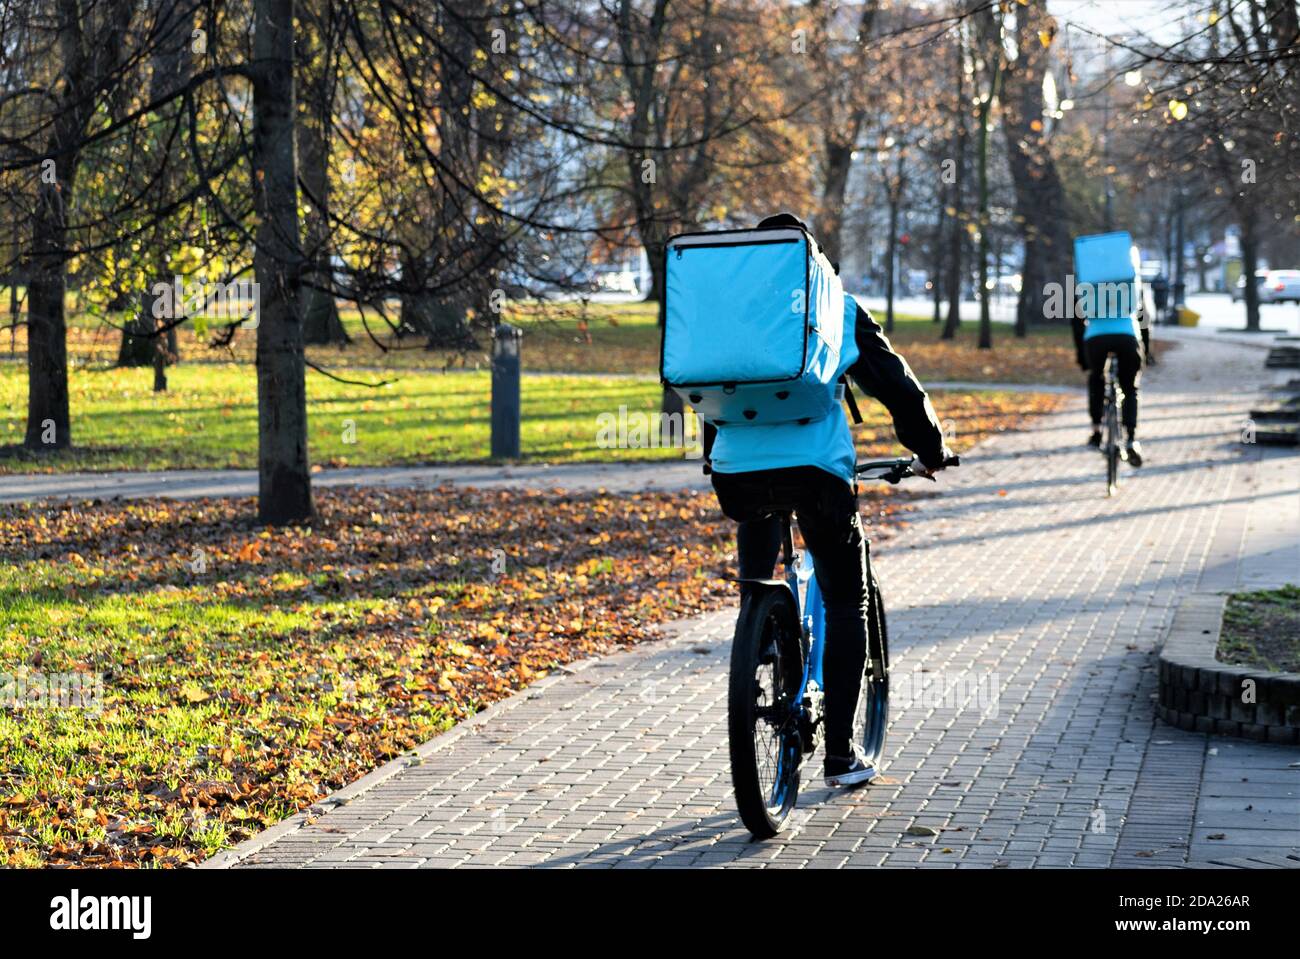 Riders with bike delivering food, online food ordering and delivery service that takes orders via a mobile app during Covid or Coronavirus time Stock Photo